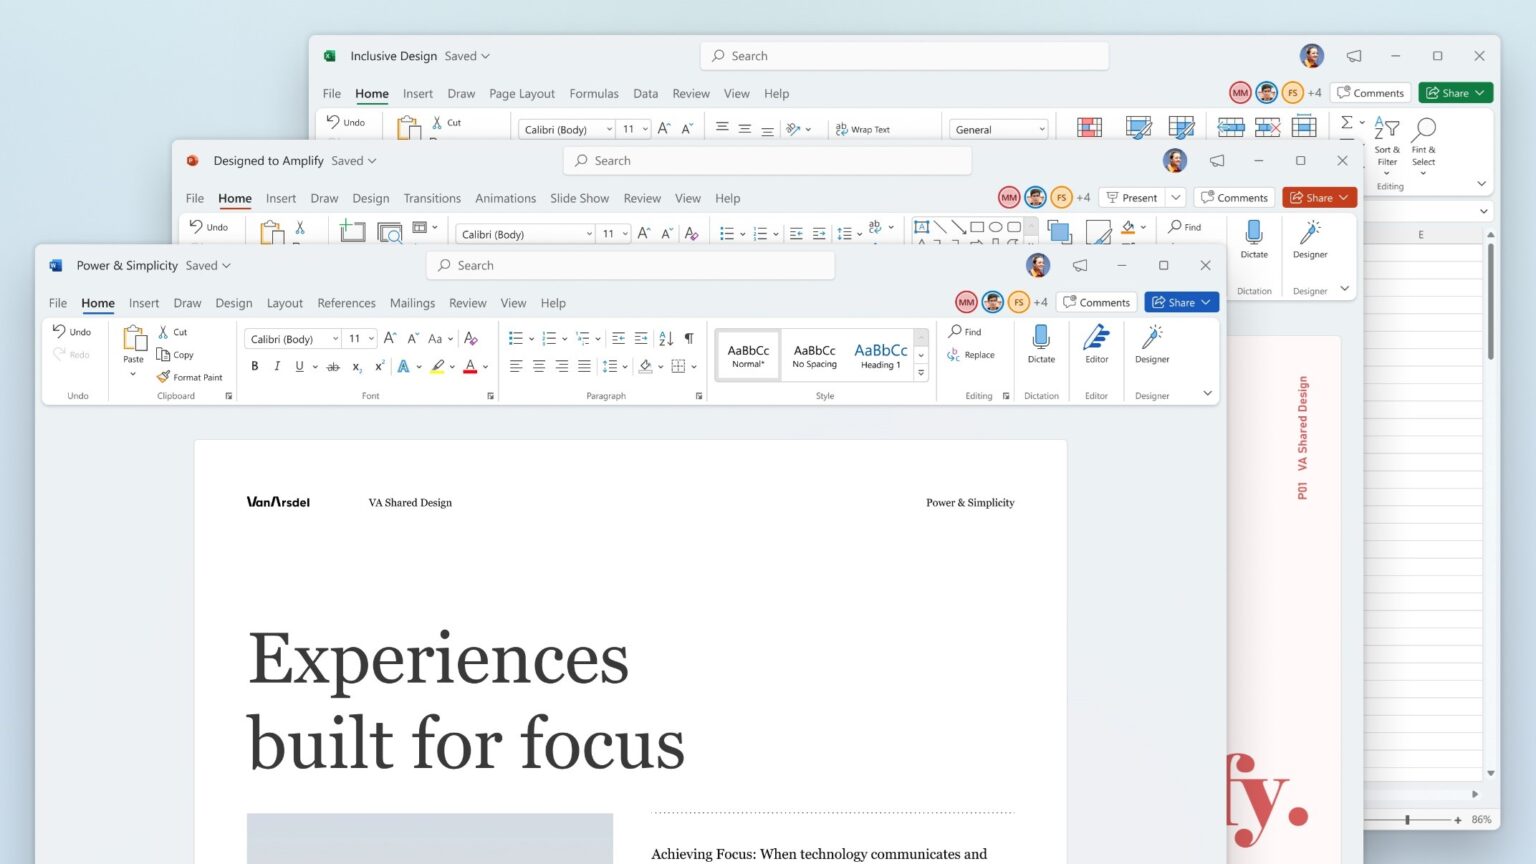 Microsoft 365 and Office 2021 release on October 5 with up to this point capabilities and pricing